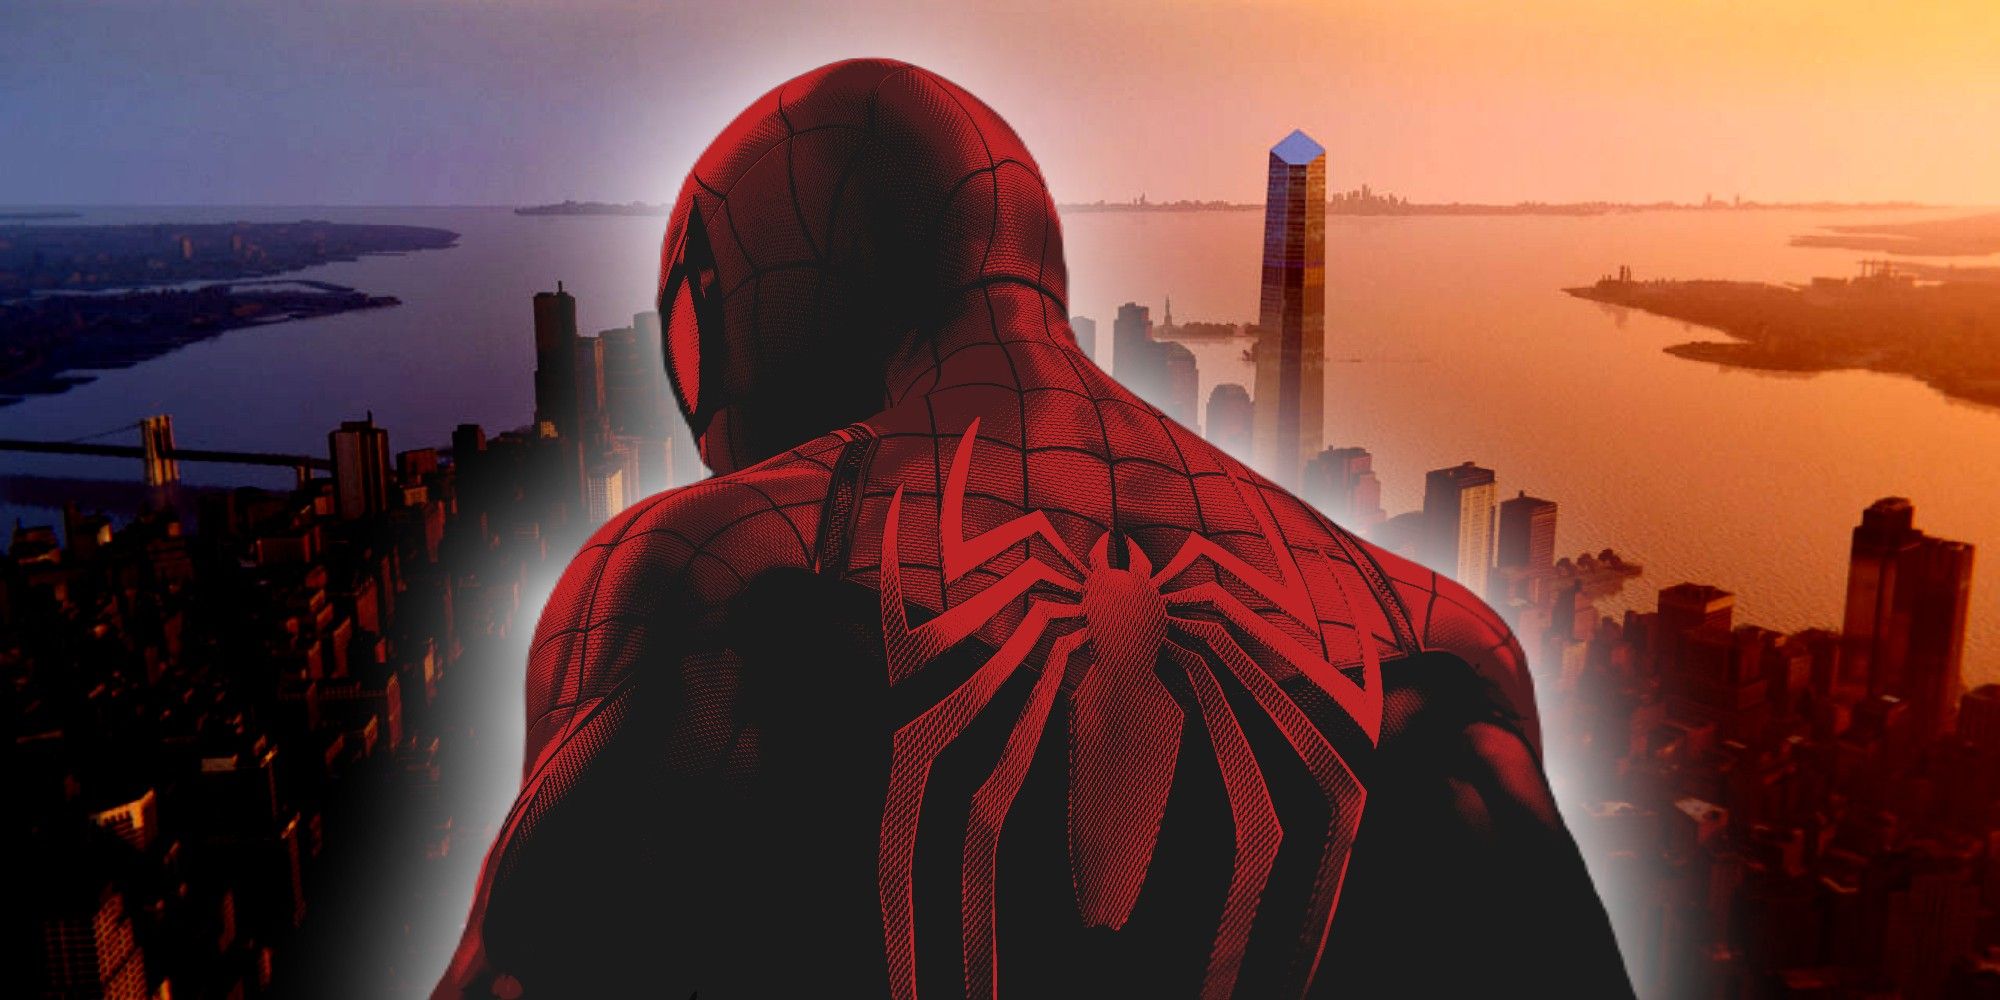 A portrait of Spider-Man looking over his shoulder against the New York City skyline